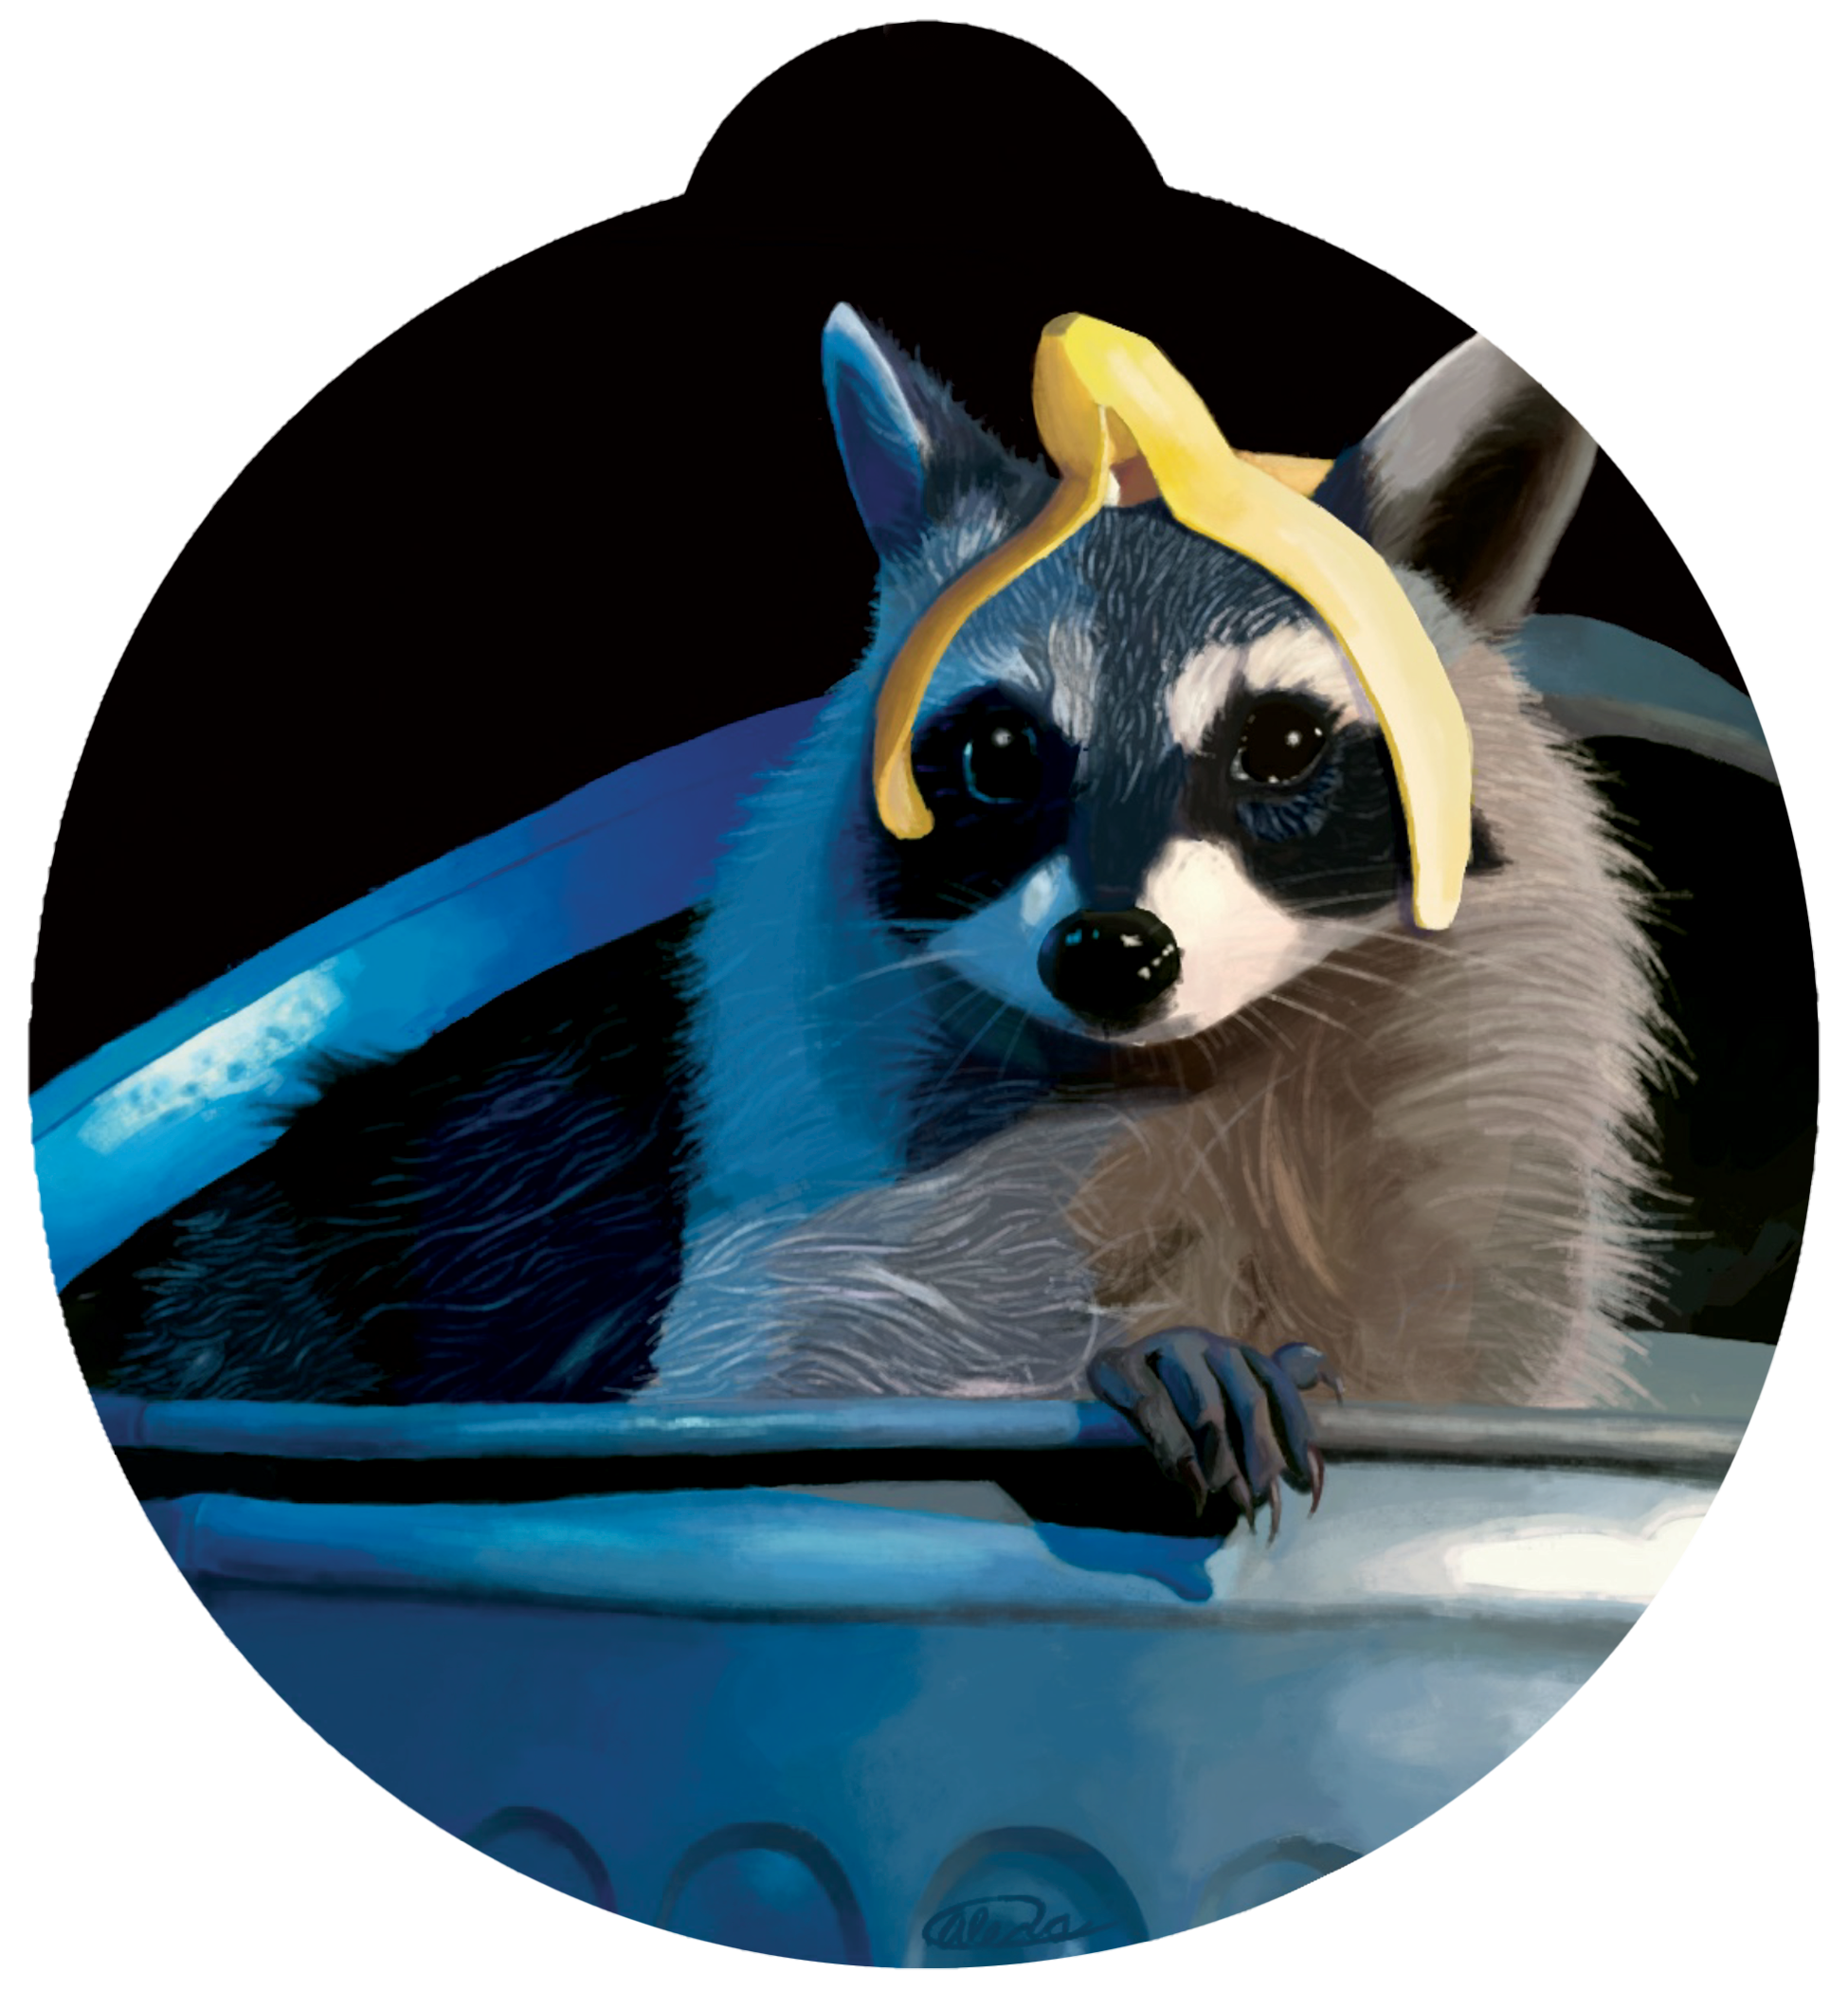 ornament depicting a raccoon with a banana peel on its head